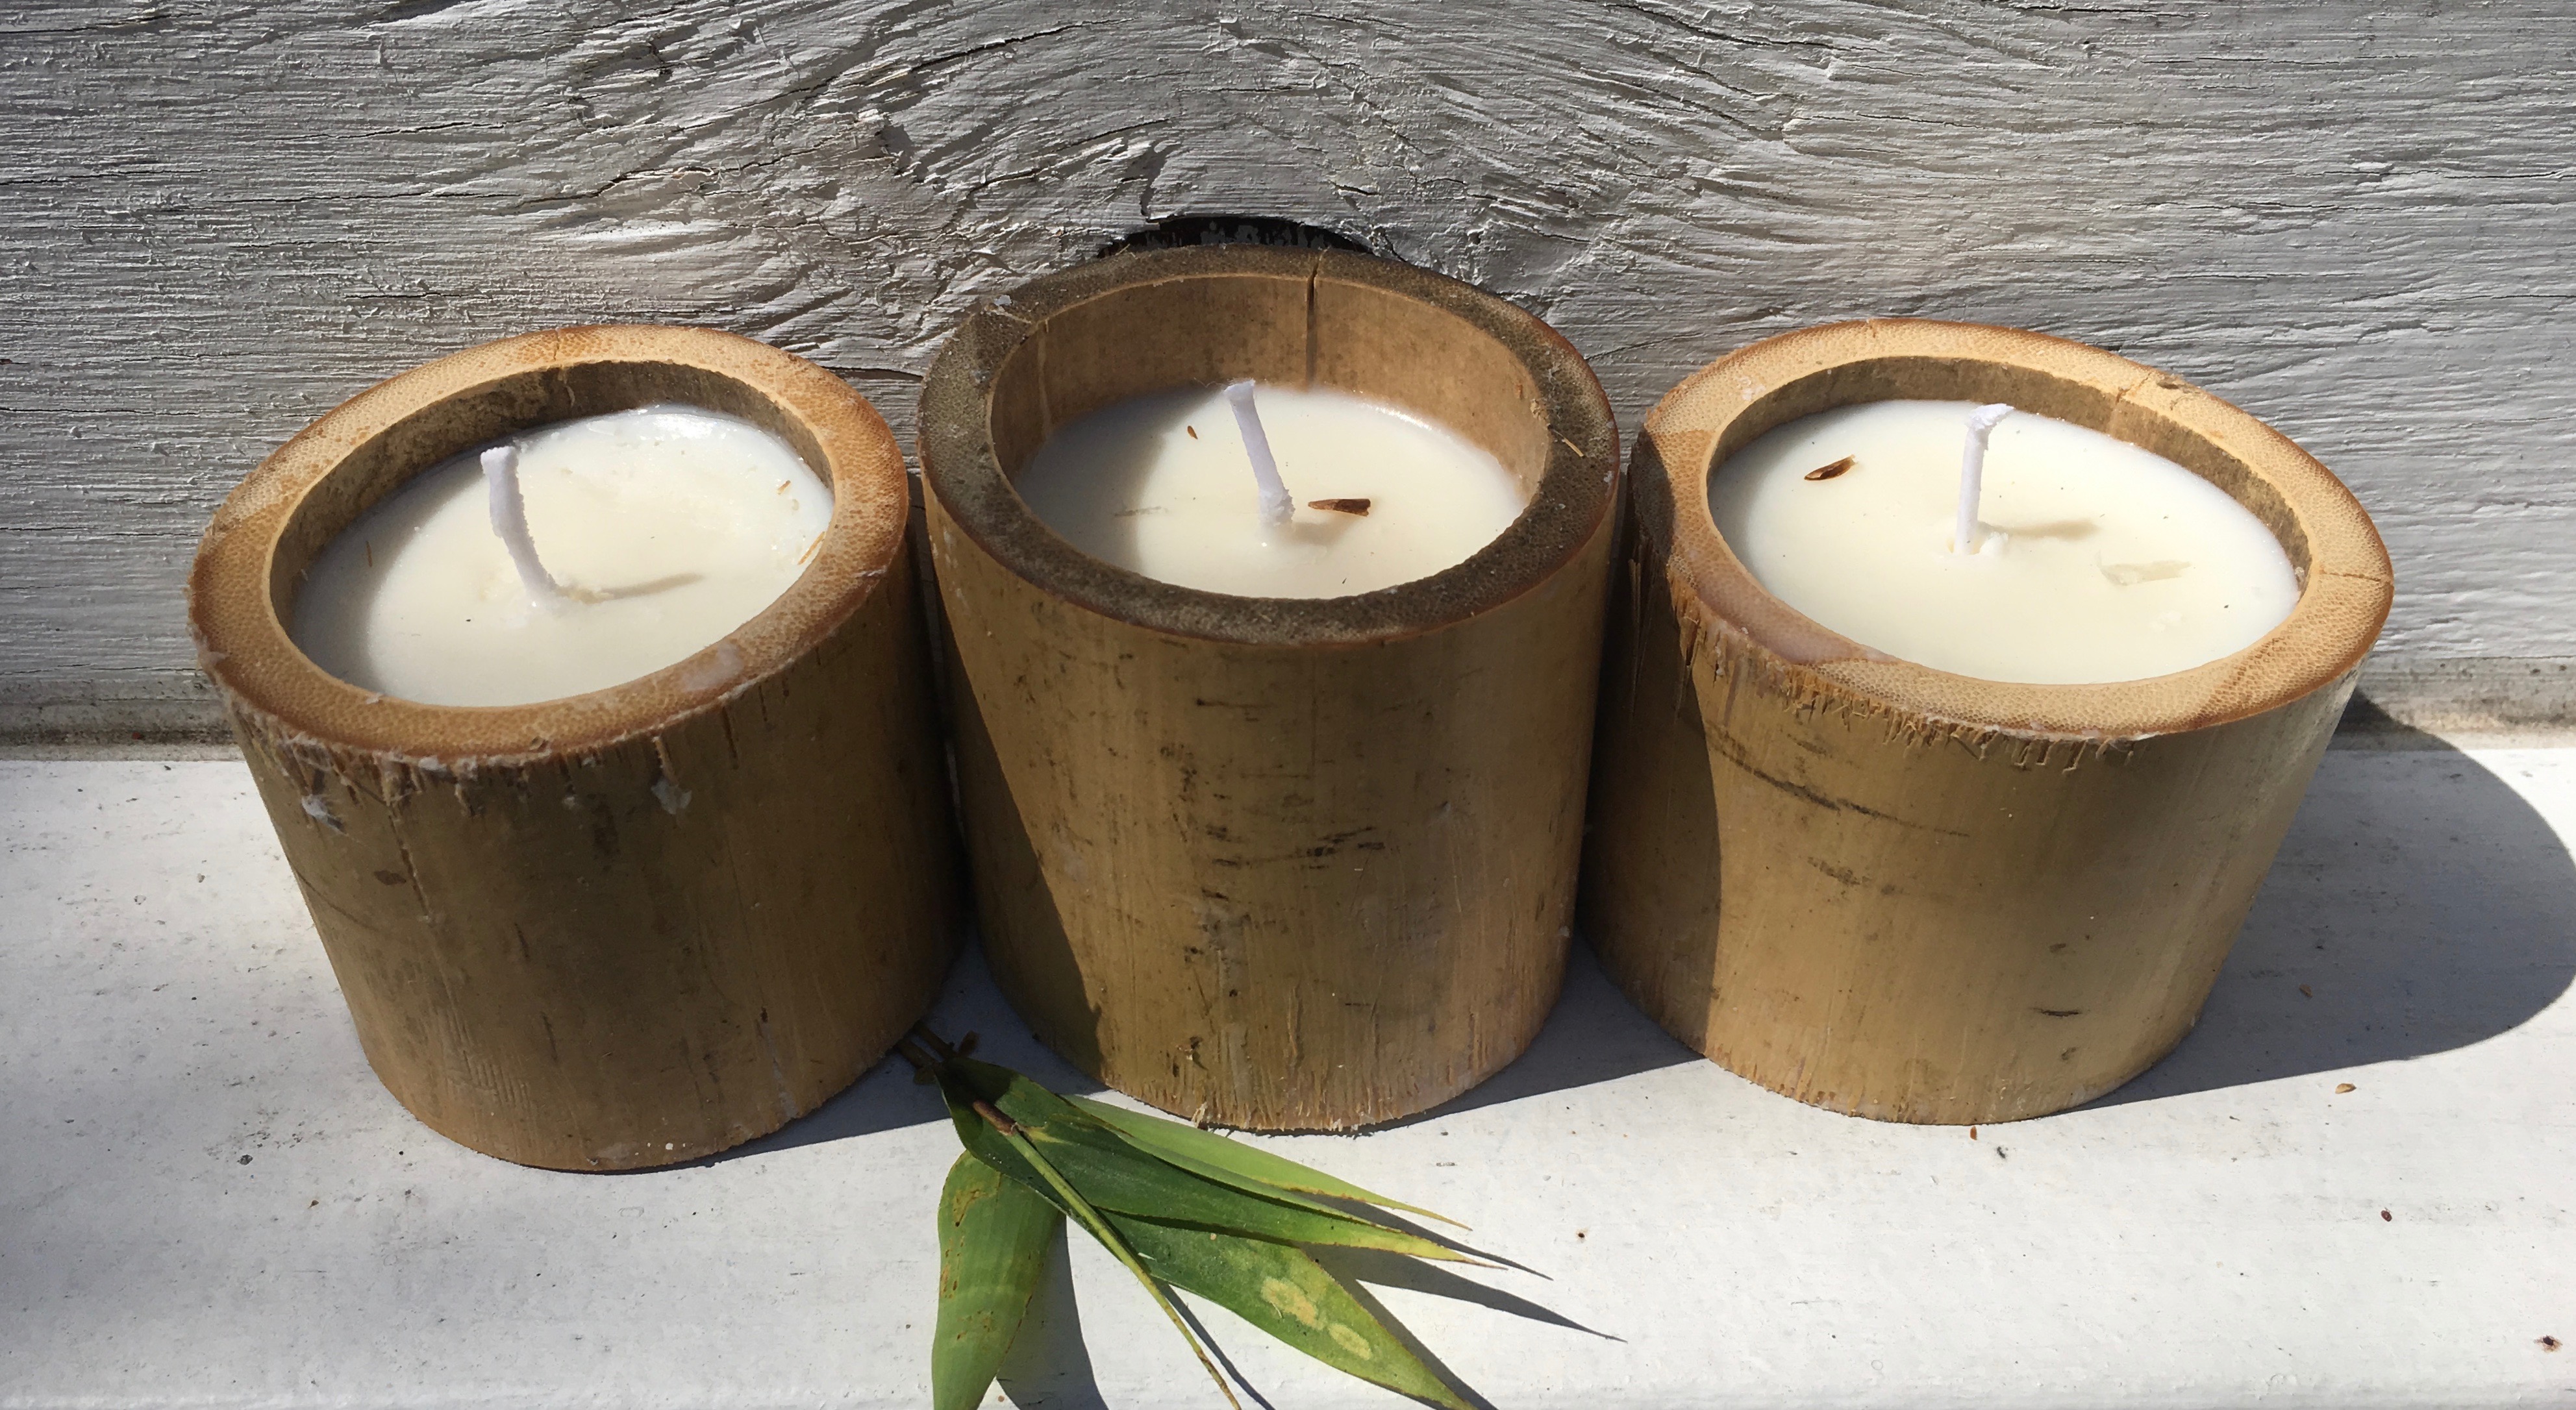 Image of candles made from bamboo